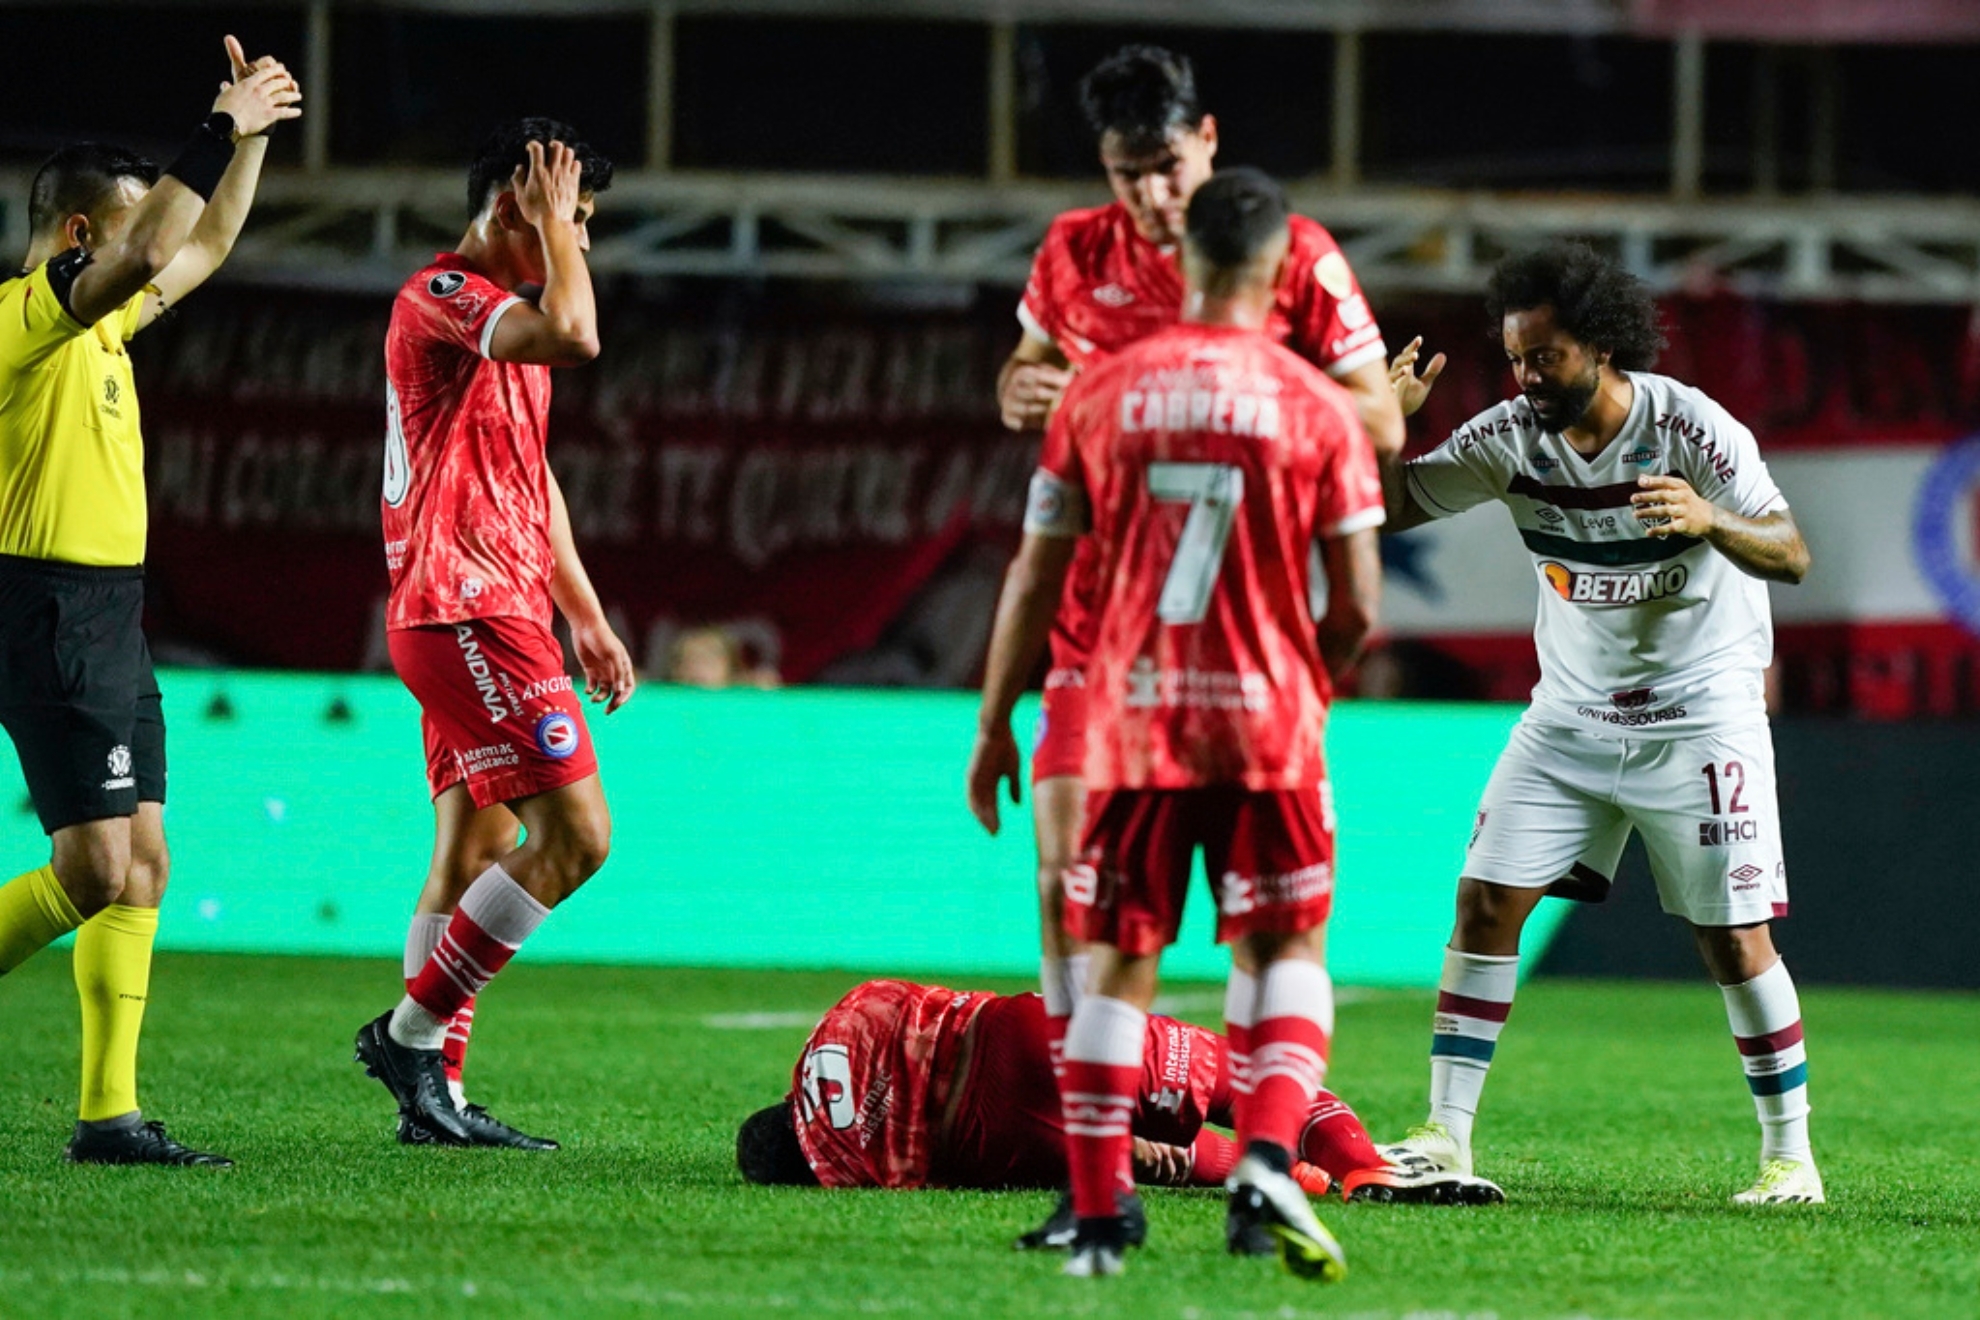 Marcelo was distraught after seeing the injury to Sanchez